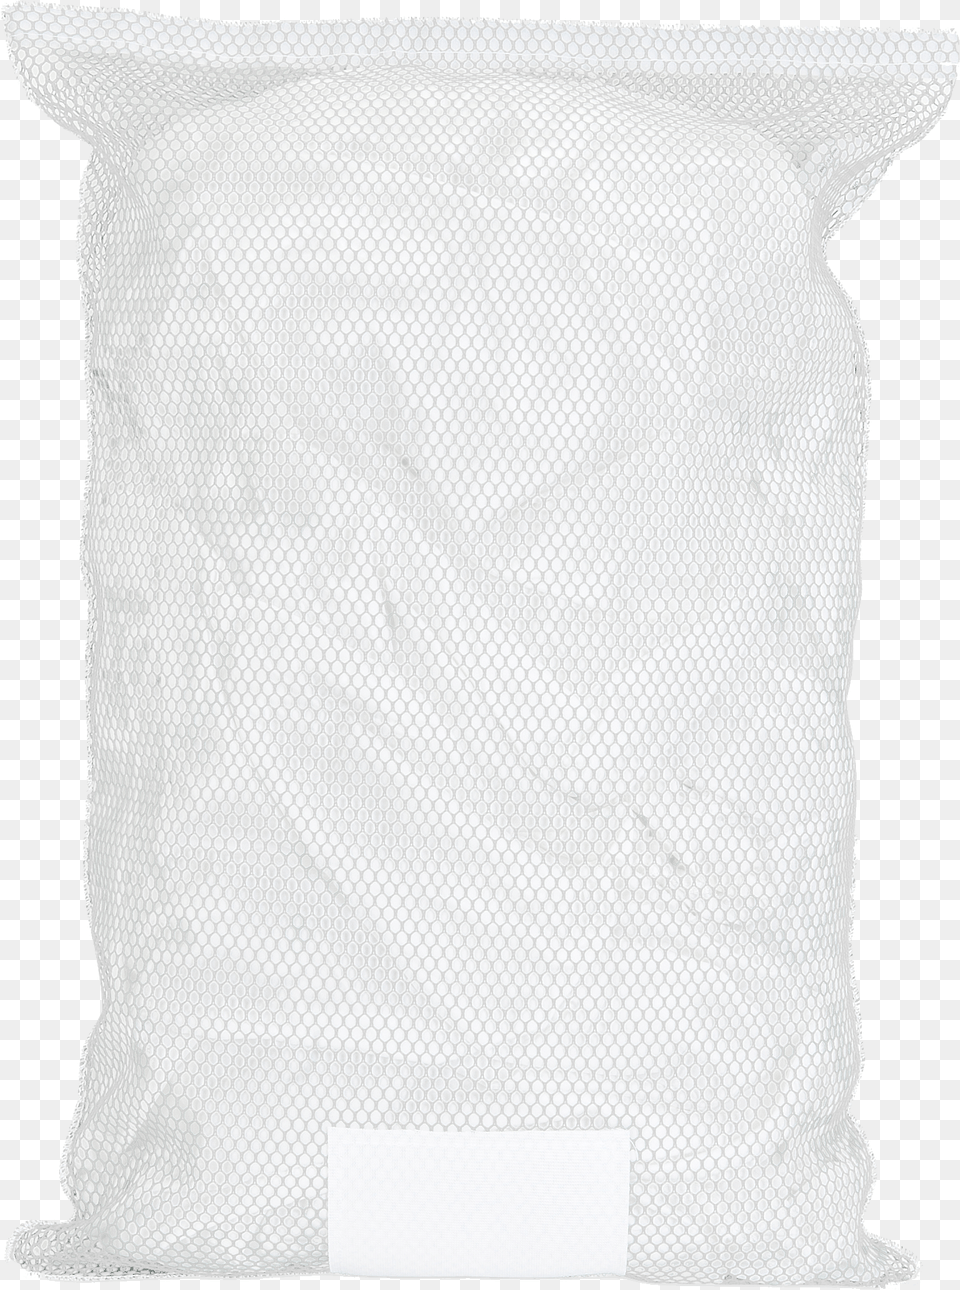 Velcro Strip Closure Laundry Nets Towel, Cushion, Home Decor, Pillow, Adult Free Png Download